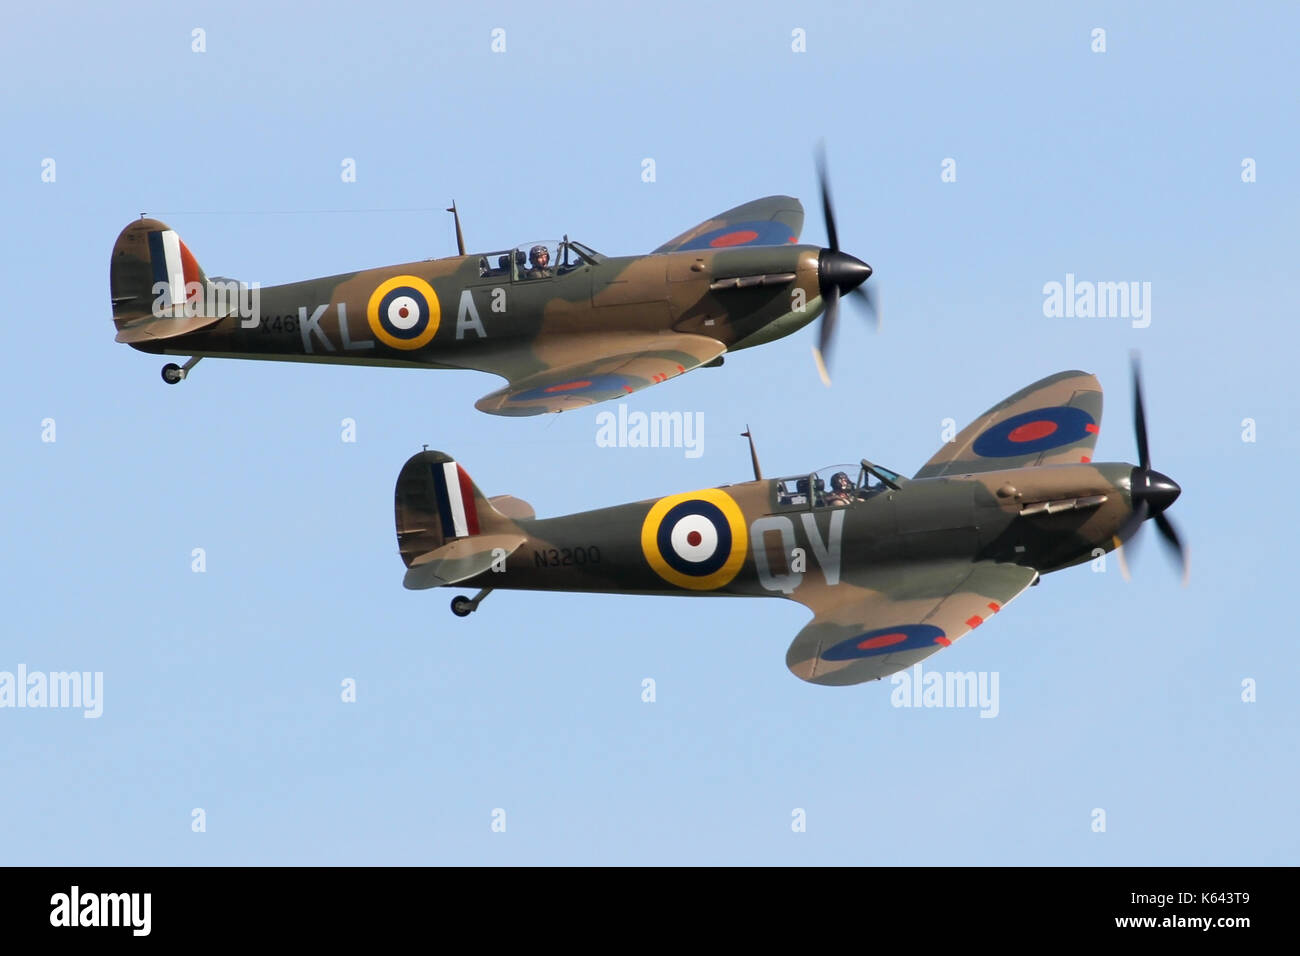 Supermarine Spitfire Mk1's displaying at a Duxford air show in May 2017. Only four of this model are currently airworthy. Stock Photo